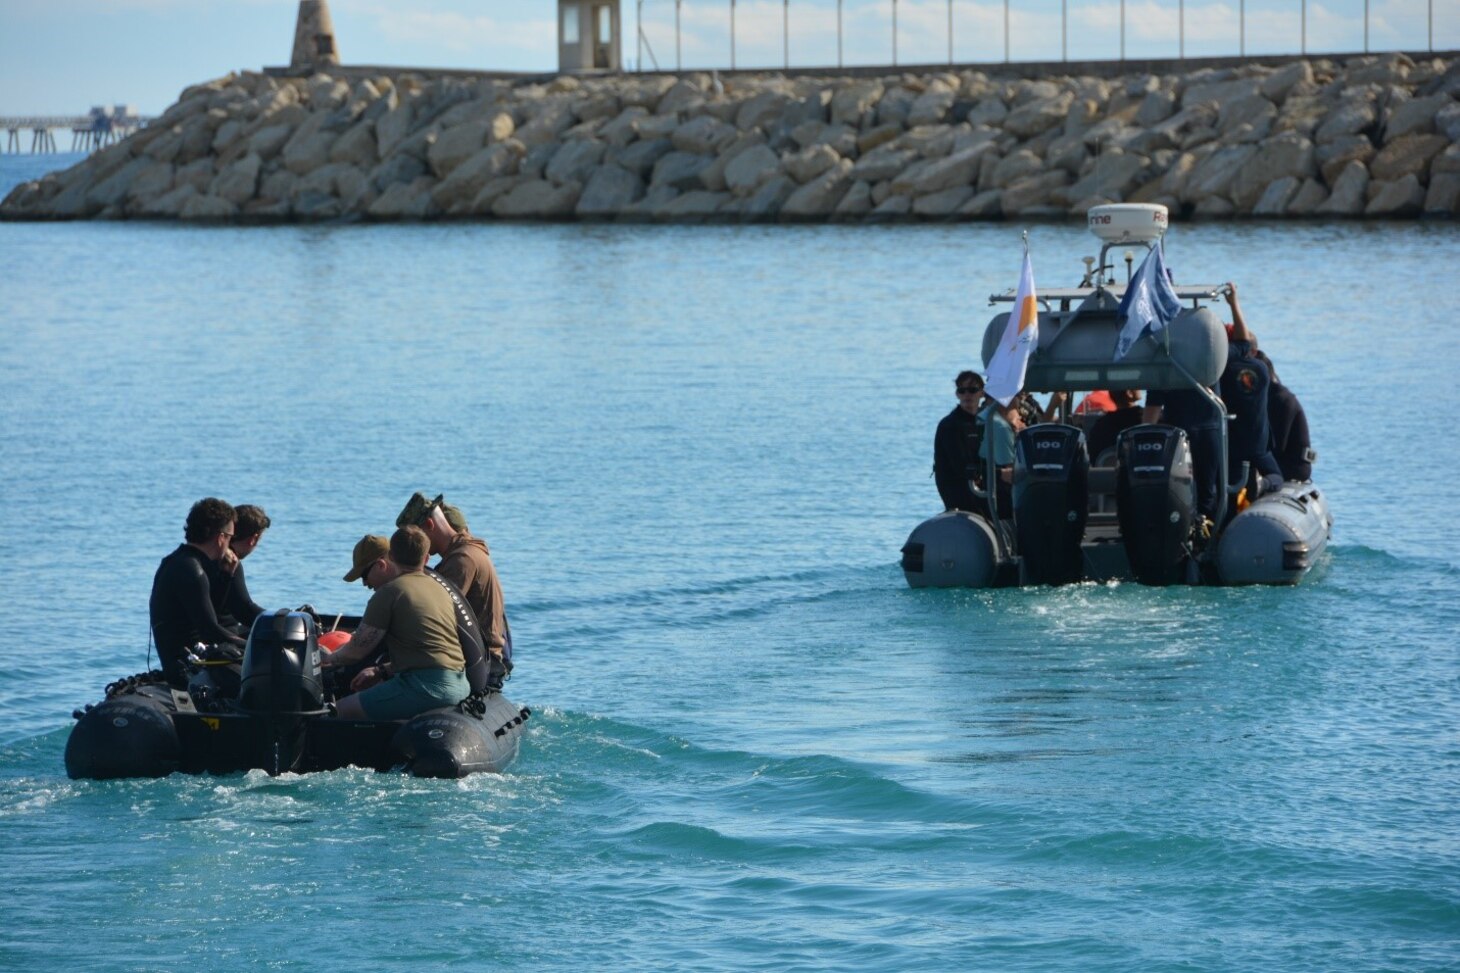 (Dec. 12, 2021) U.S. Navy divers, assigned to Construction Dive Detachment ALFA (CDD/A), a detachment of Underwater Construction Team (UCT) ONE, conduct joint dive training and exchange with the Cypriot National Guard, Cyprus Navy, Cyprus National Police, and Cyprus Fire Service personnel, Dec. 12, 2021. The training and exchange covers dive operations, dive medicine, underwater search techniques, and rescue operations. The UCT CDDs are specially trained and equipped units within the Navy Expeditionary Combat Force that construct, inspect, repair and maintain ports, ocean facilities, underwater systems and general maritime infrastructure.